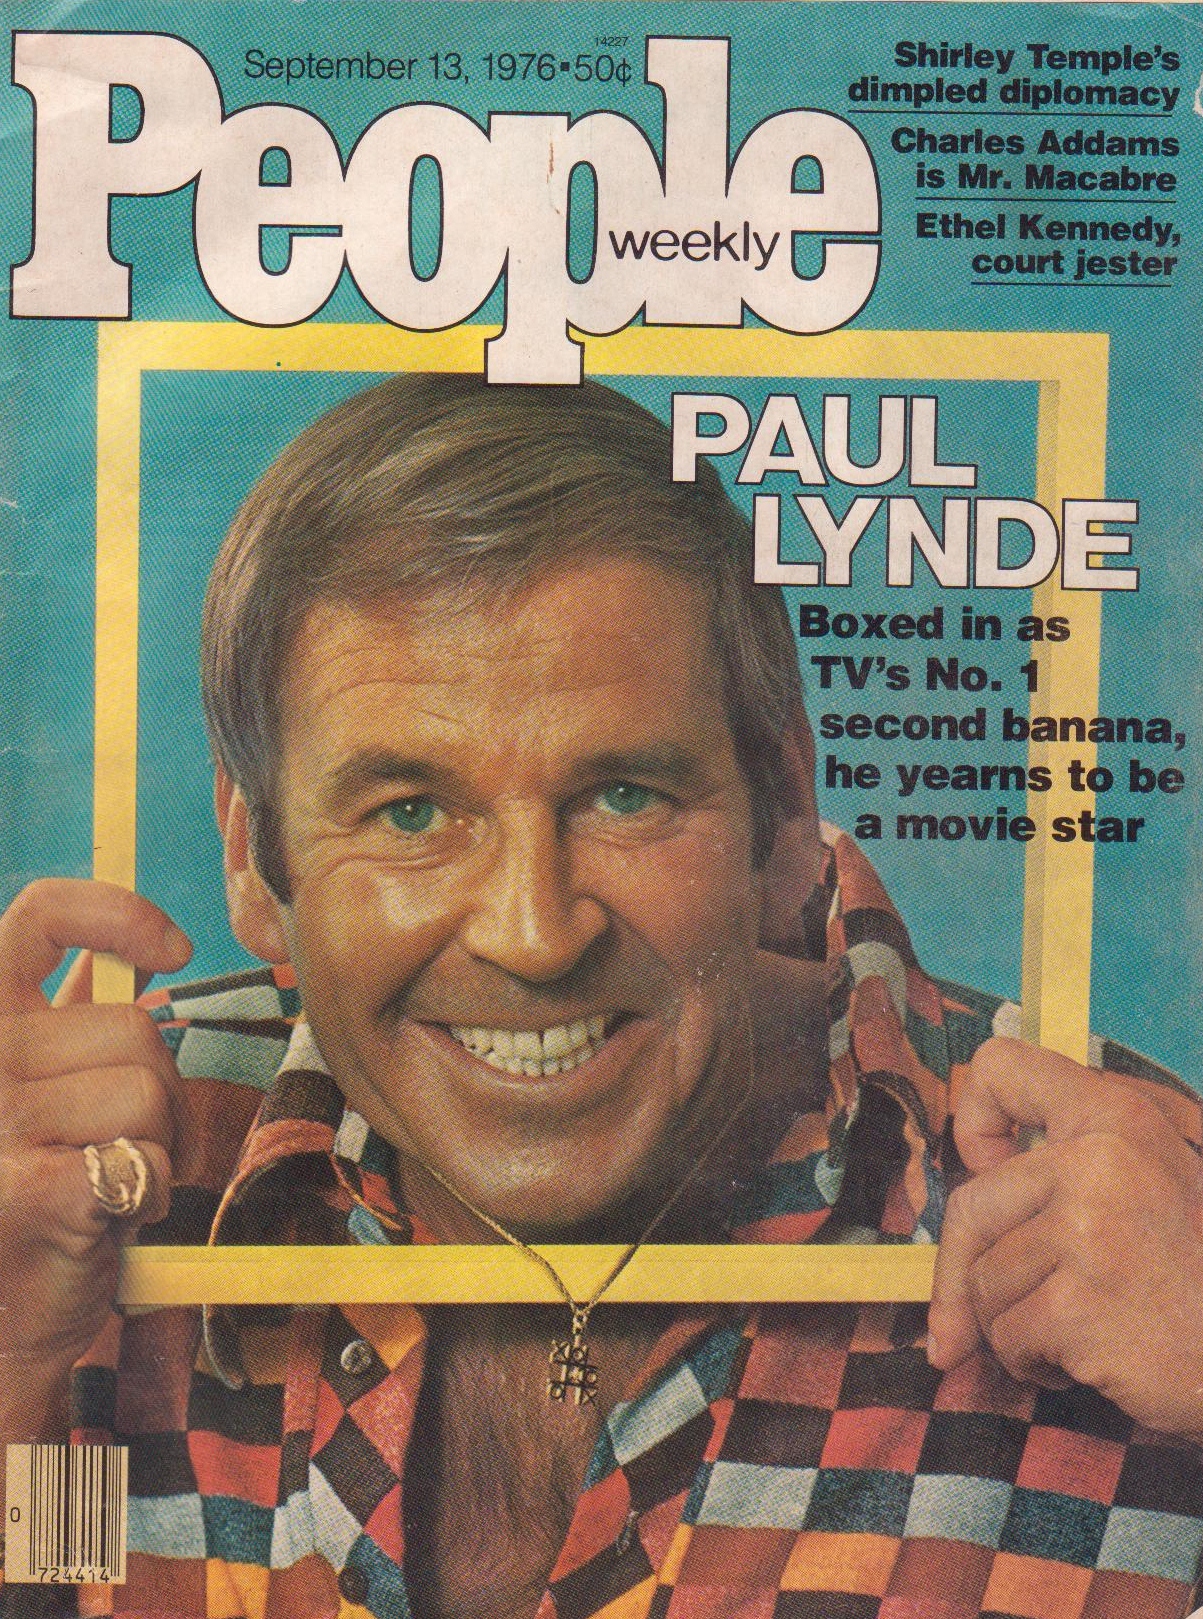 Paul Lynde on People cover